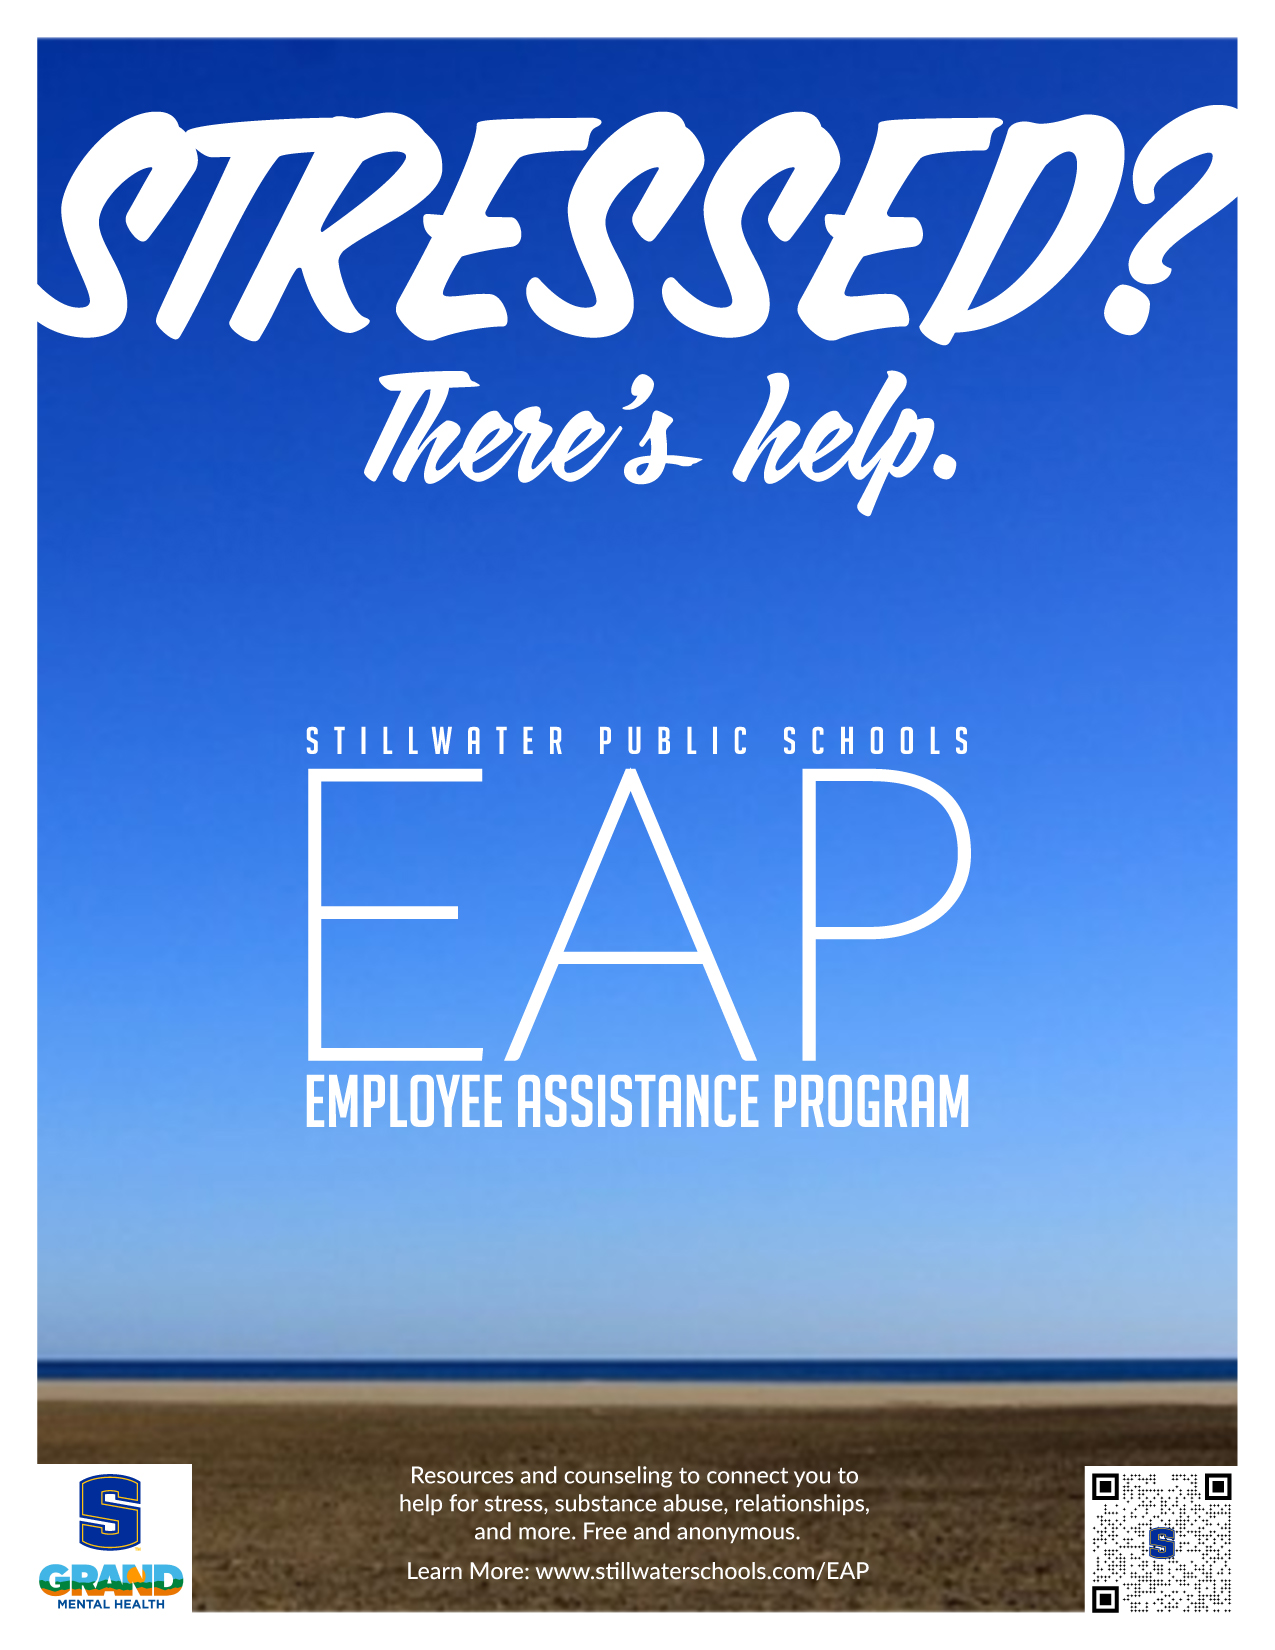 Stressed? There's help. SPS Employee Assistance Program